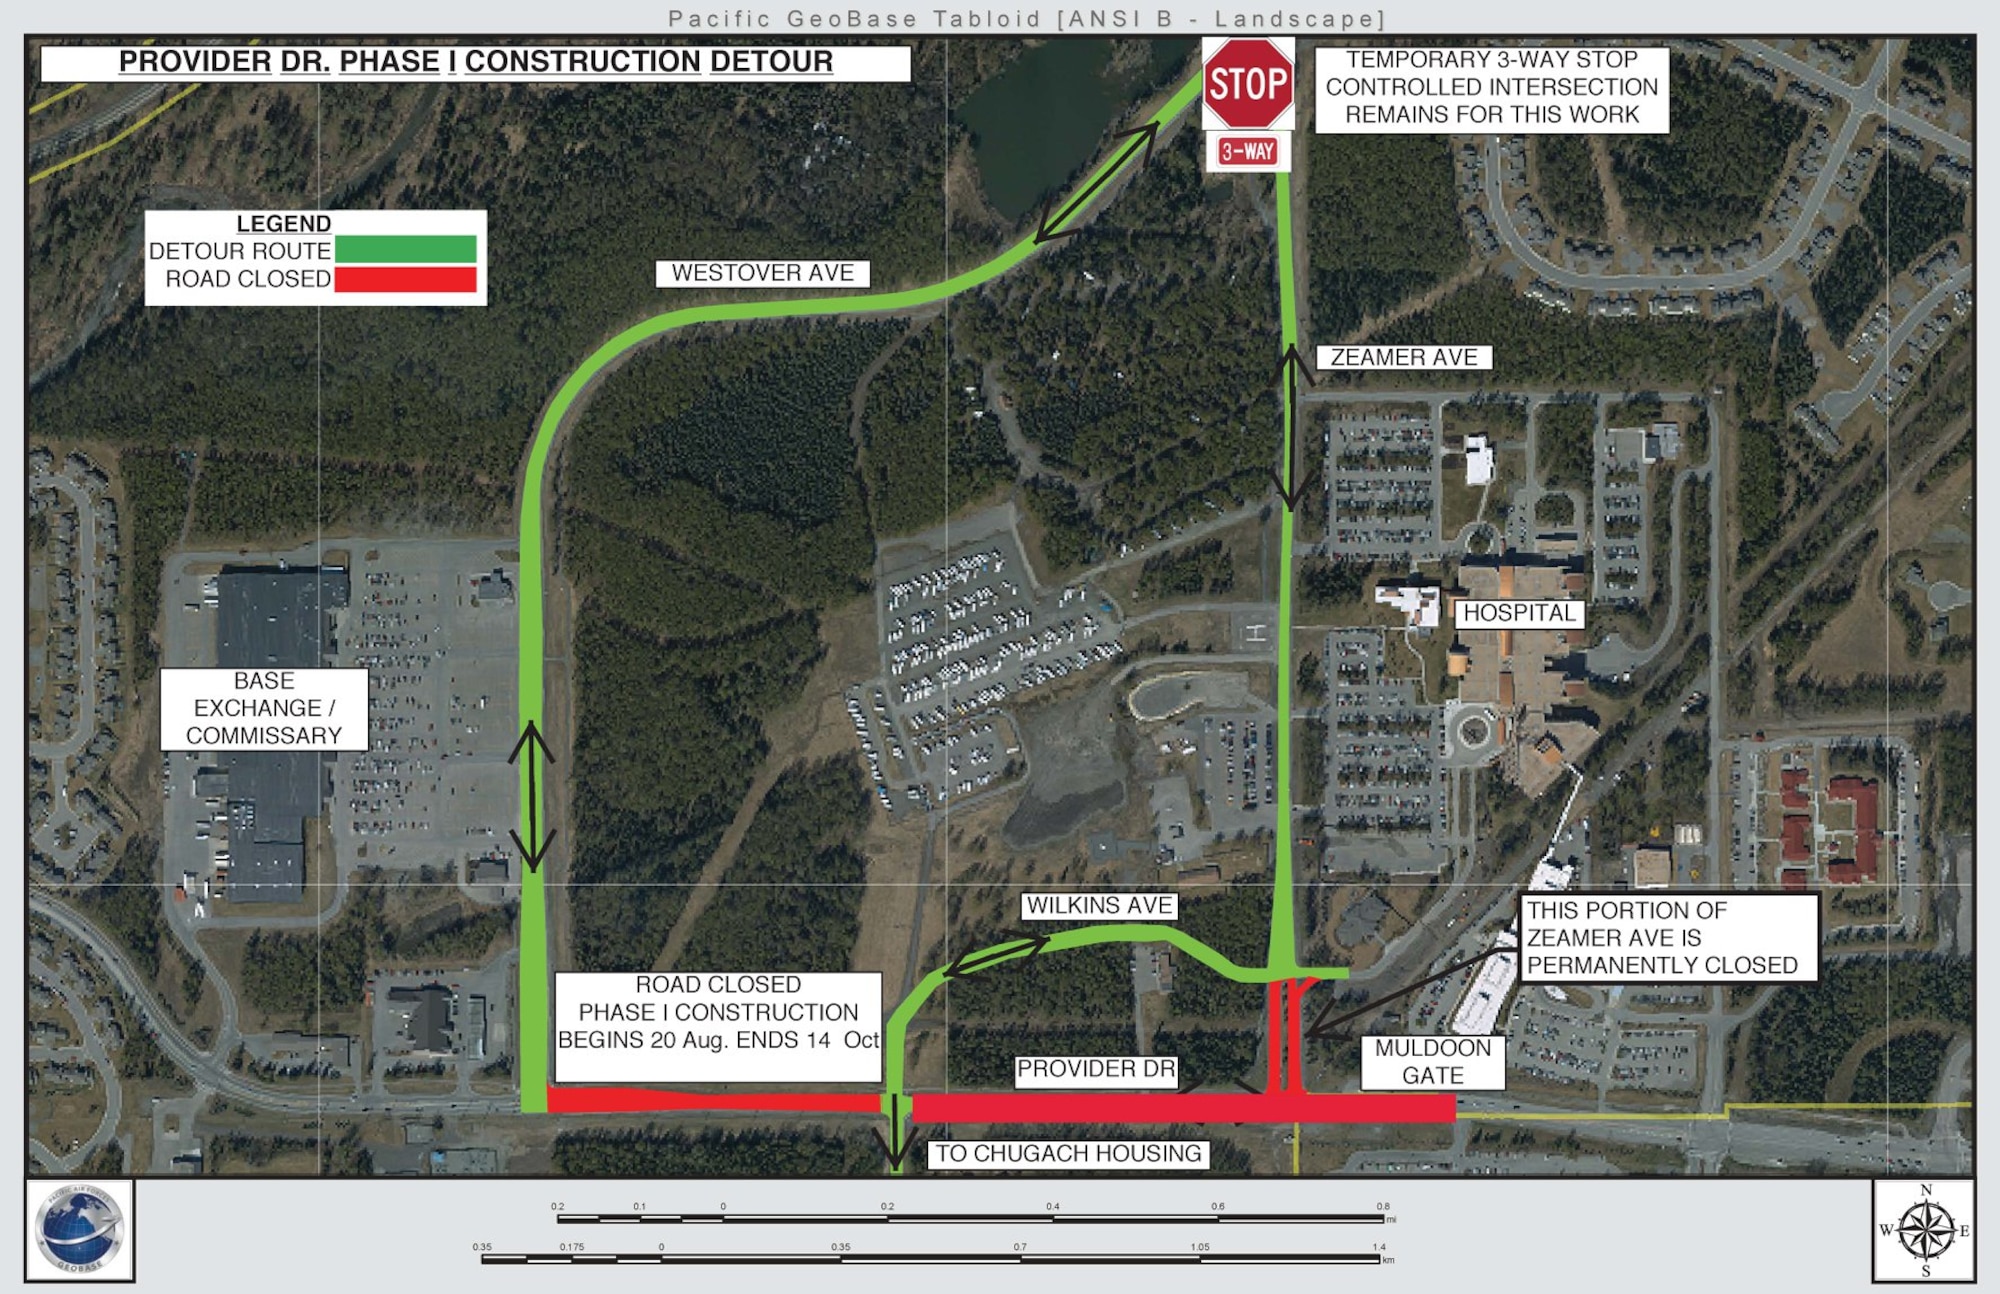 A map shows the detours to be in effect during a Muldoon Gate and Provider Drive closure scheduled for Aug. 20 to Oct. 14, 2018, at Joint Base Elmendorf-Richardson, Alaska.